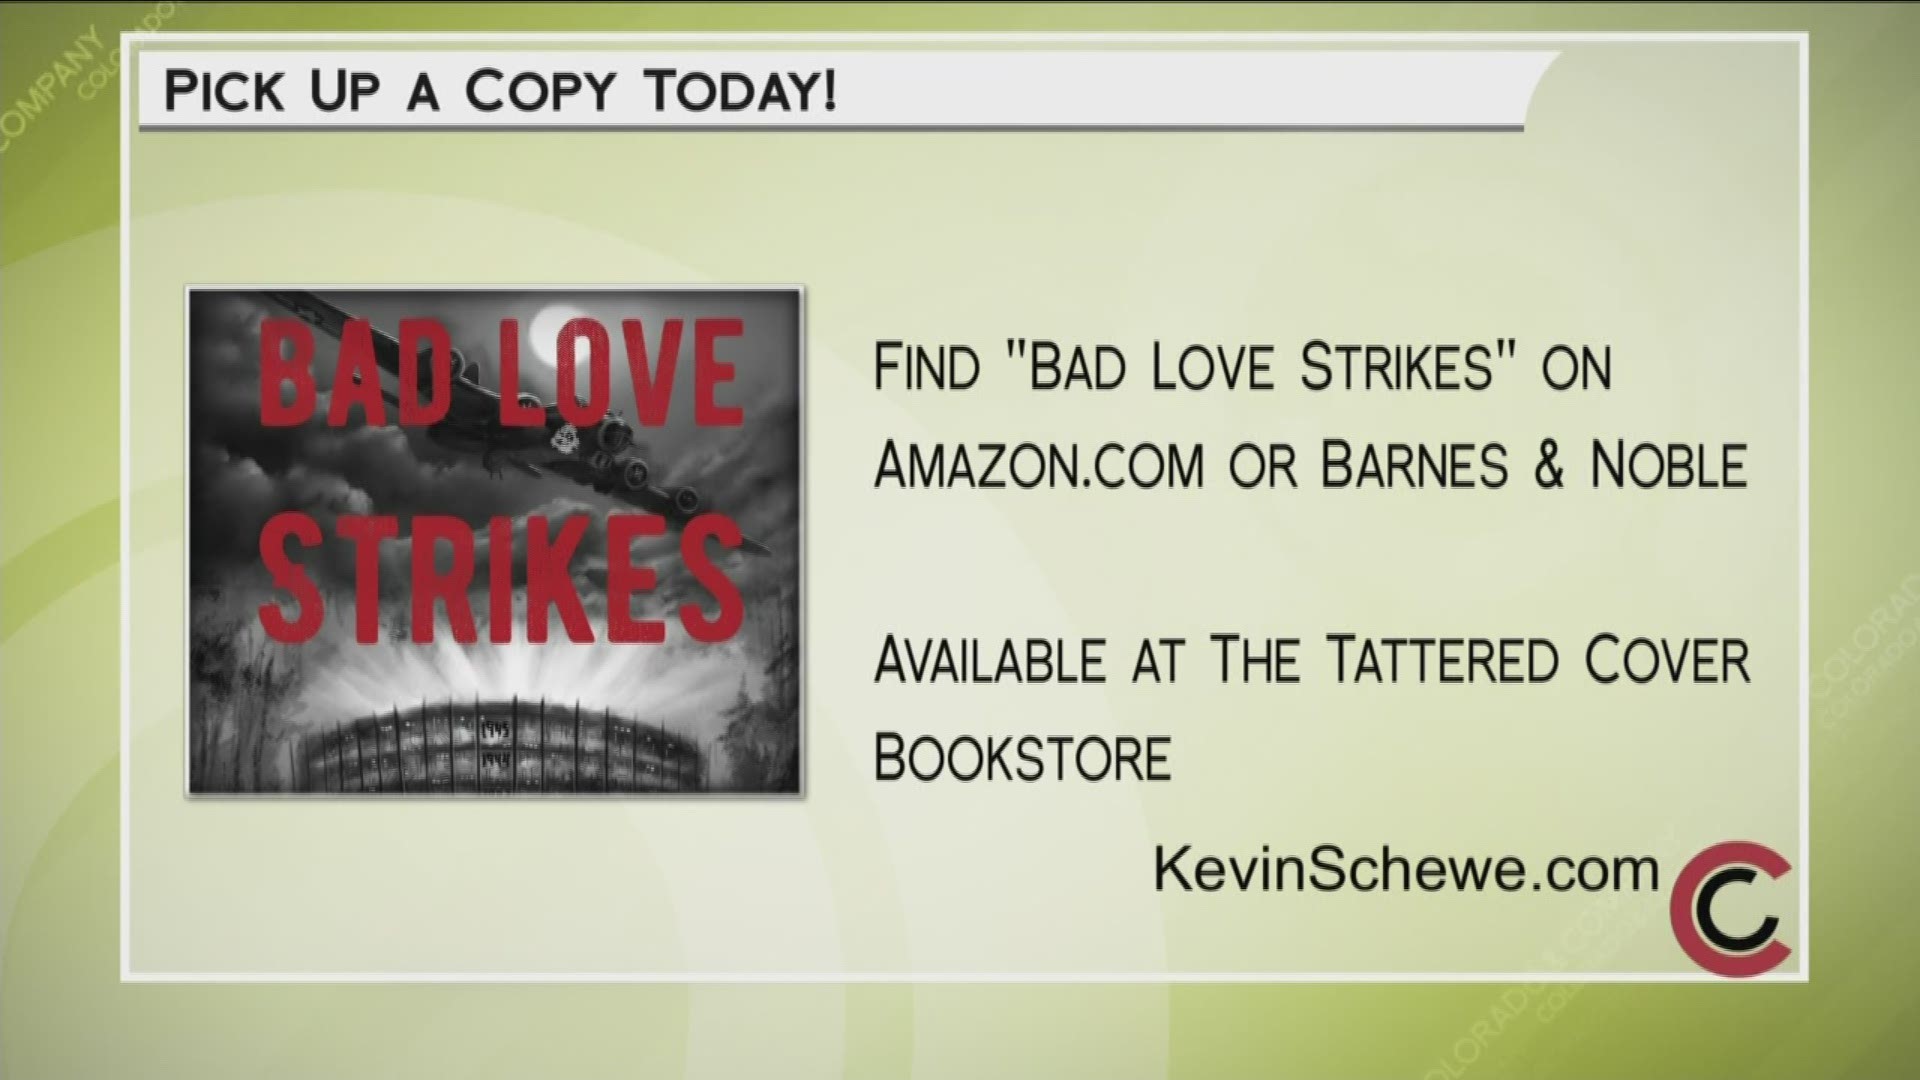 "Bad Love Strikes" is a coming-of-age book about a group of teenagers who travel back in time to WWII. Find it at KevinSchewe.com or in Denver at the Tattered Cover.